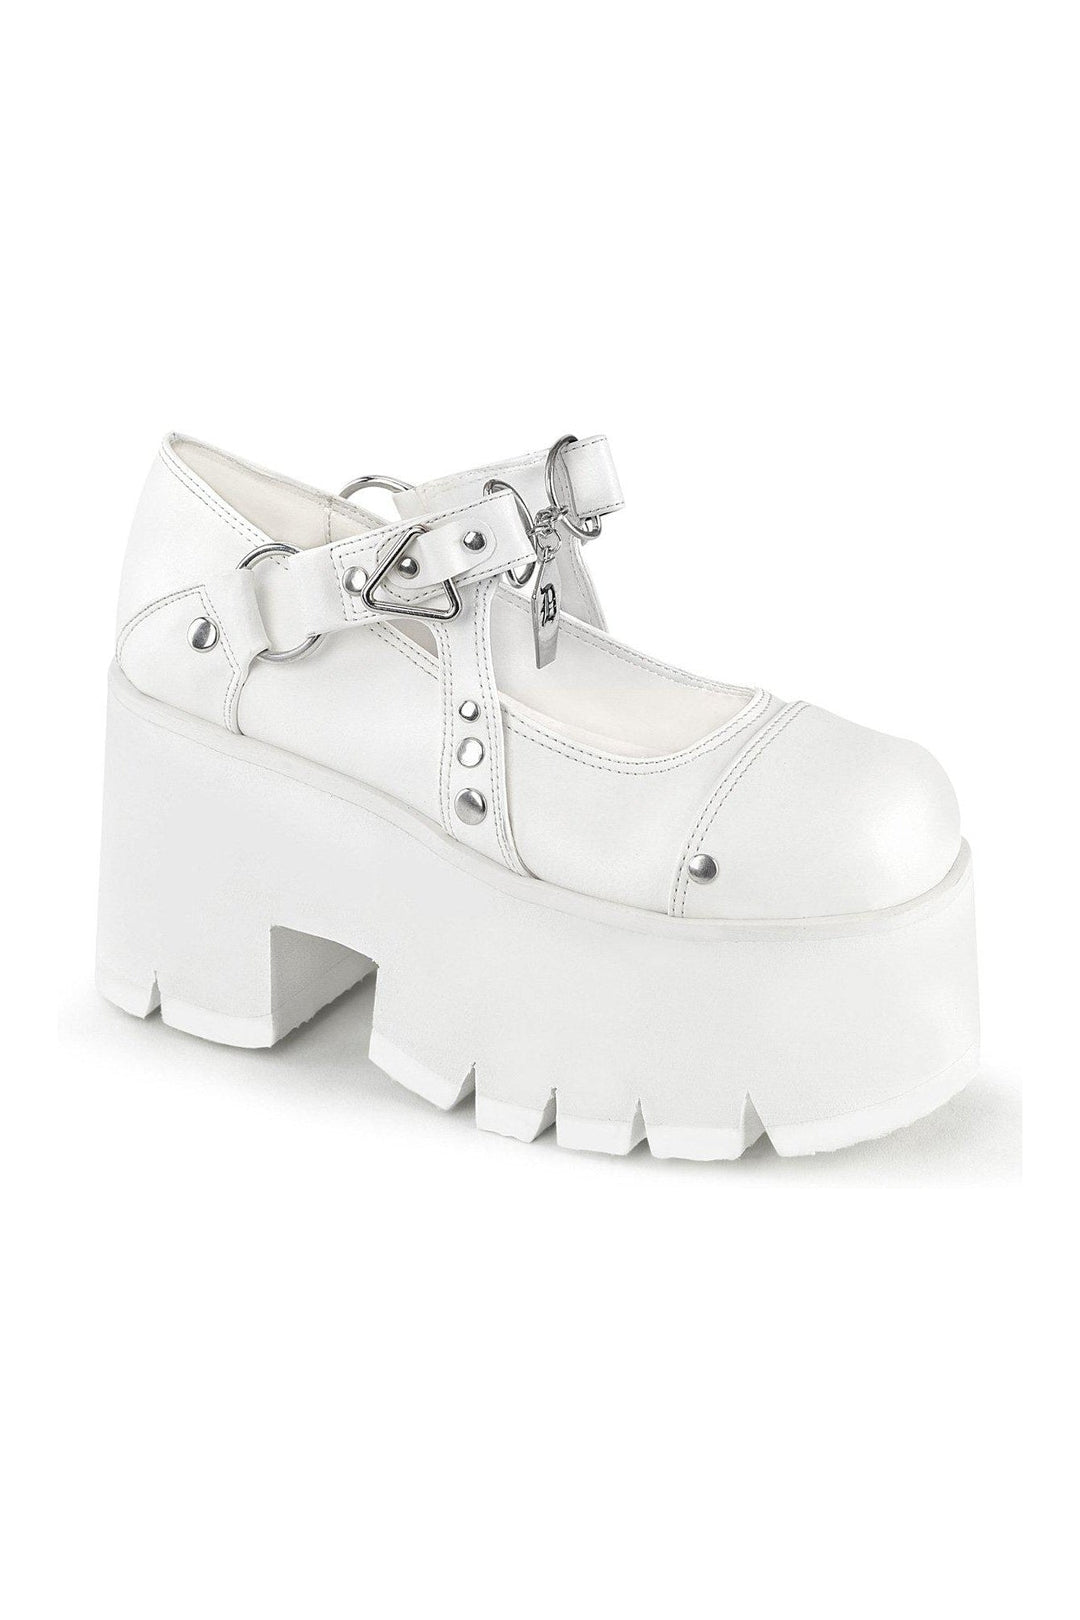 ASHES-33 Mary Jane | White Faux Leather-Mary Janes-Demonia-SEXYSHOES.COM